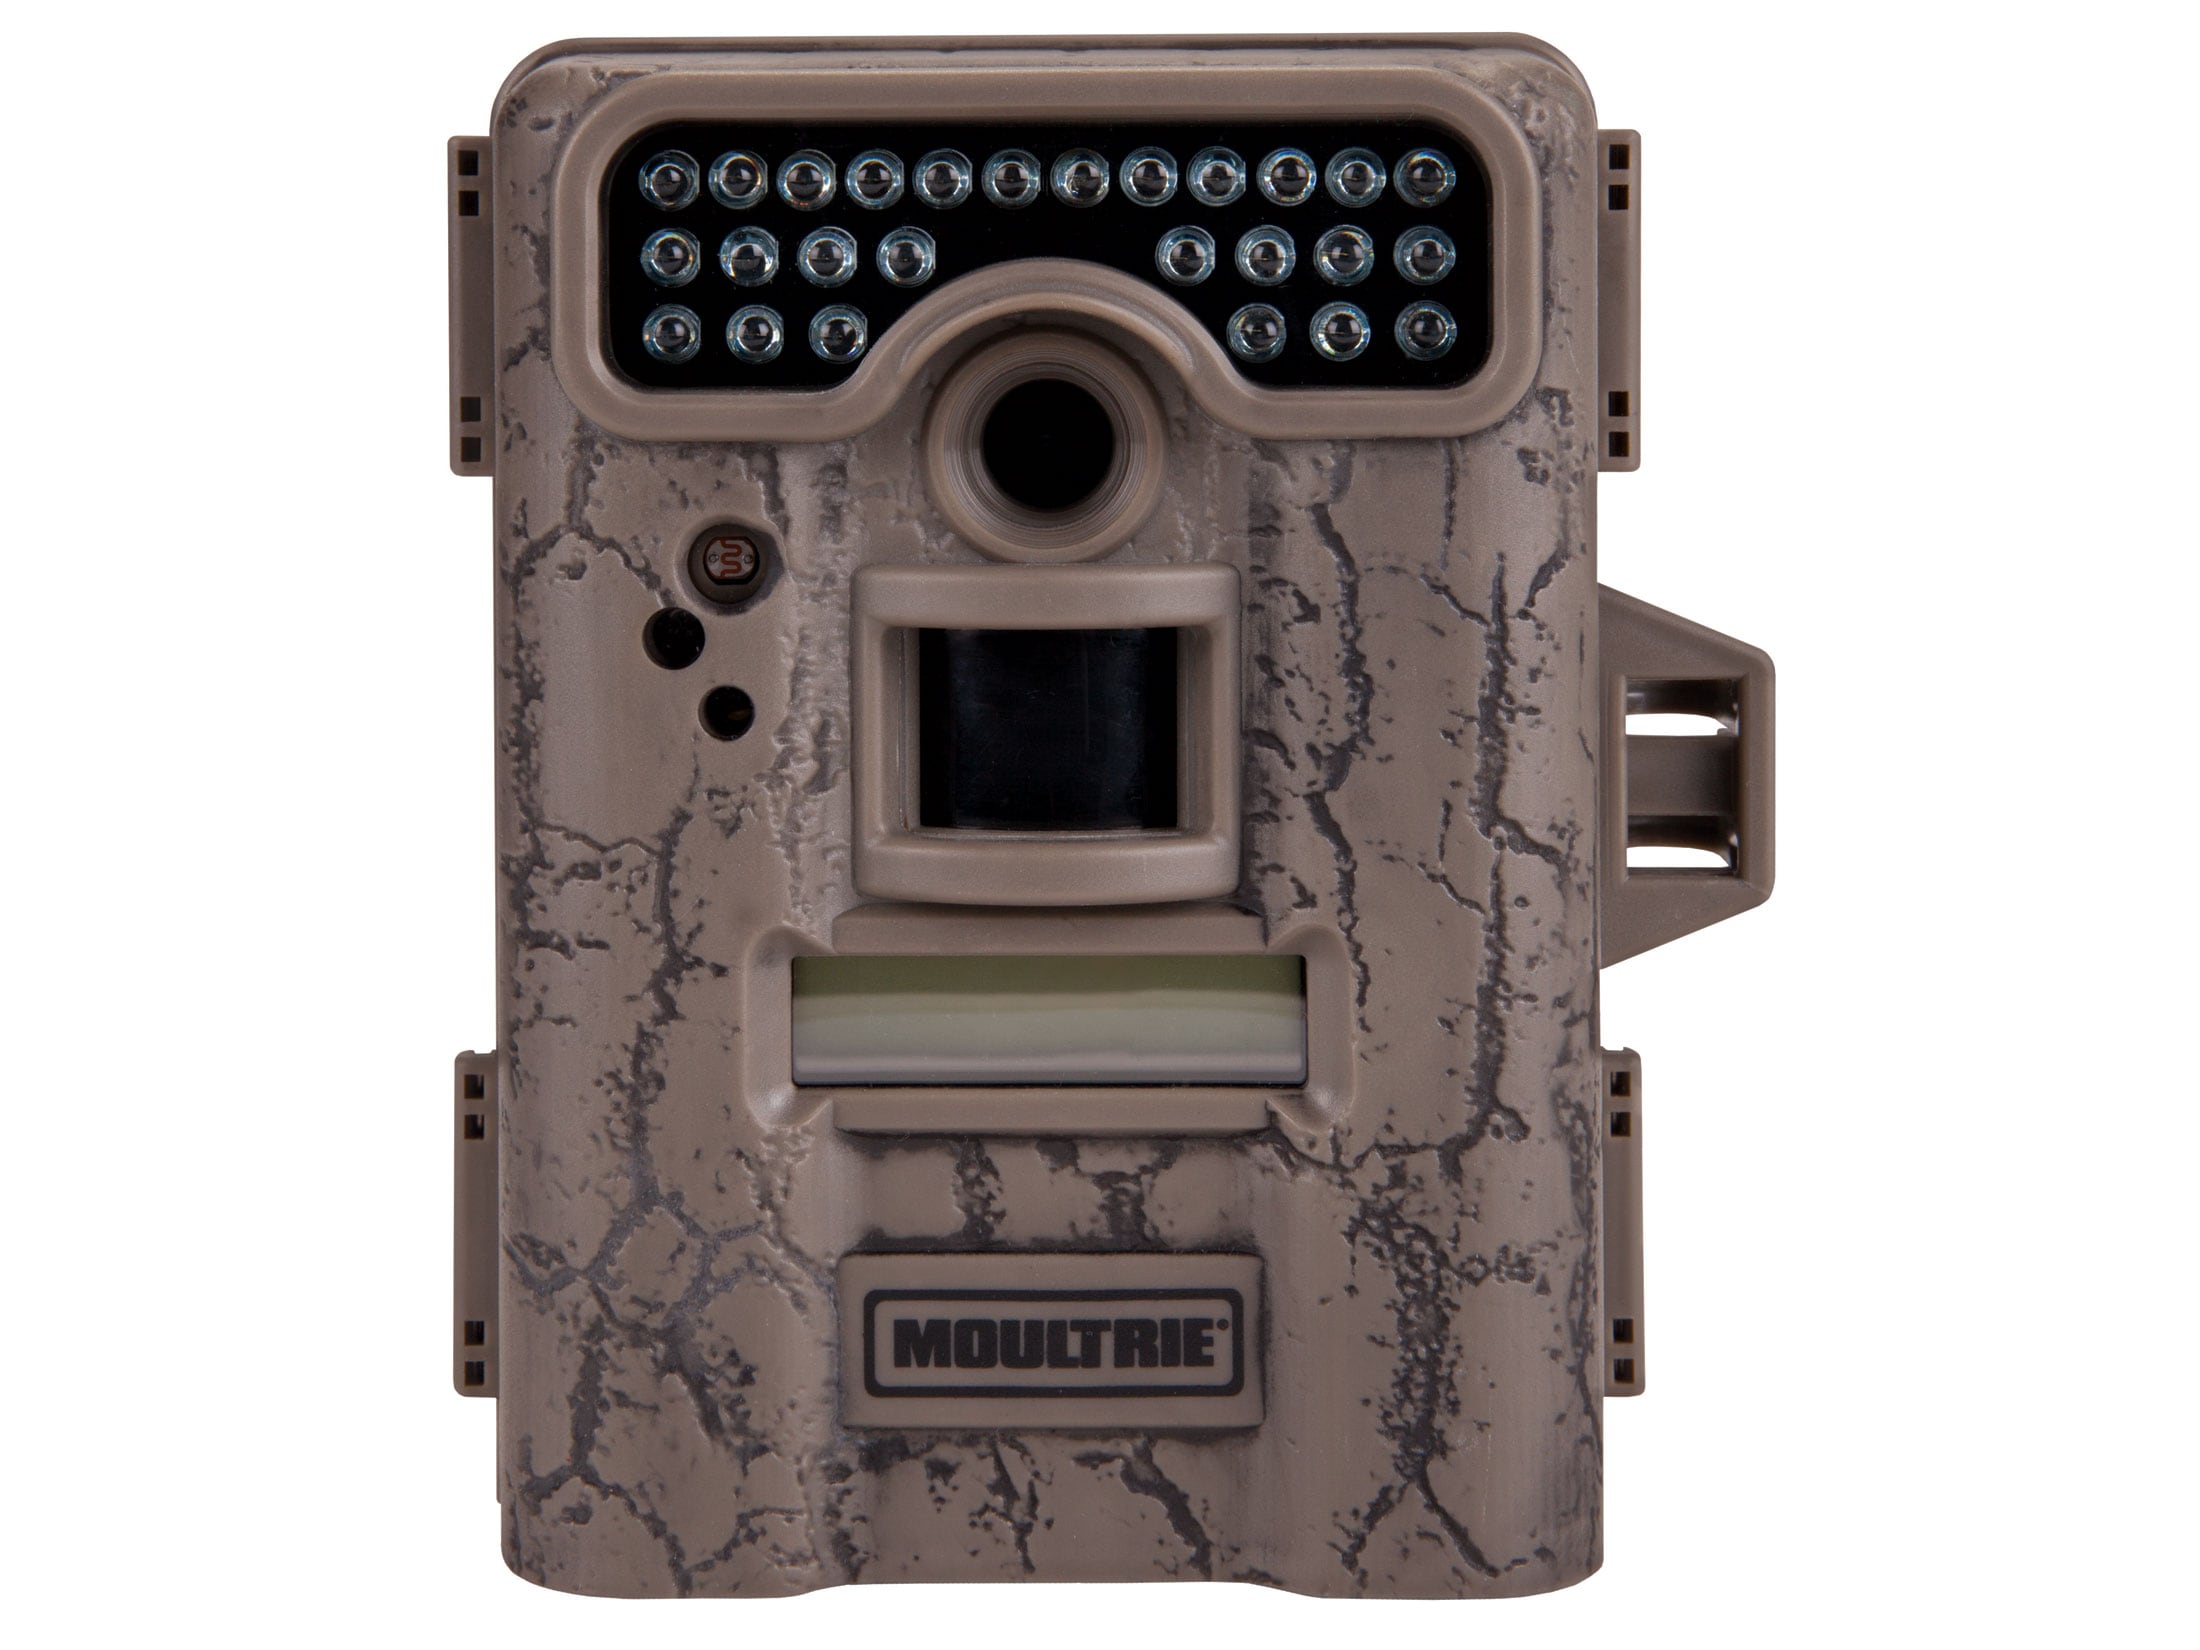 Moultrie D-444 Infrared Game Camera 8.0 Megapixel Tan